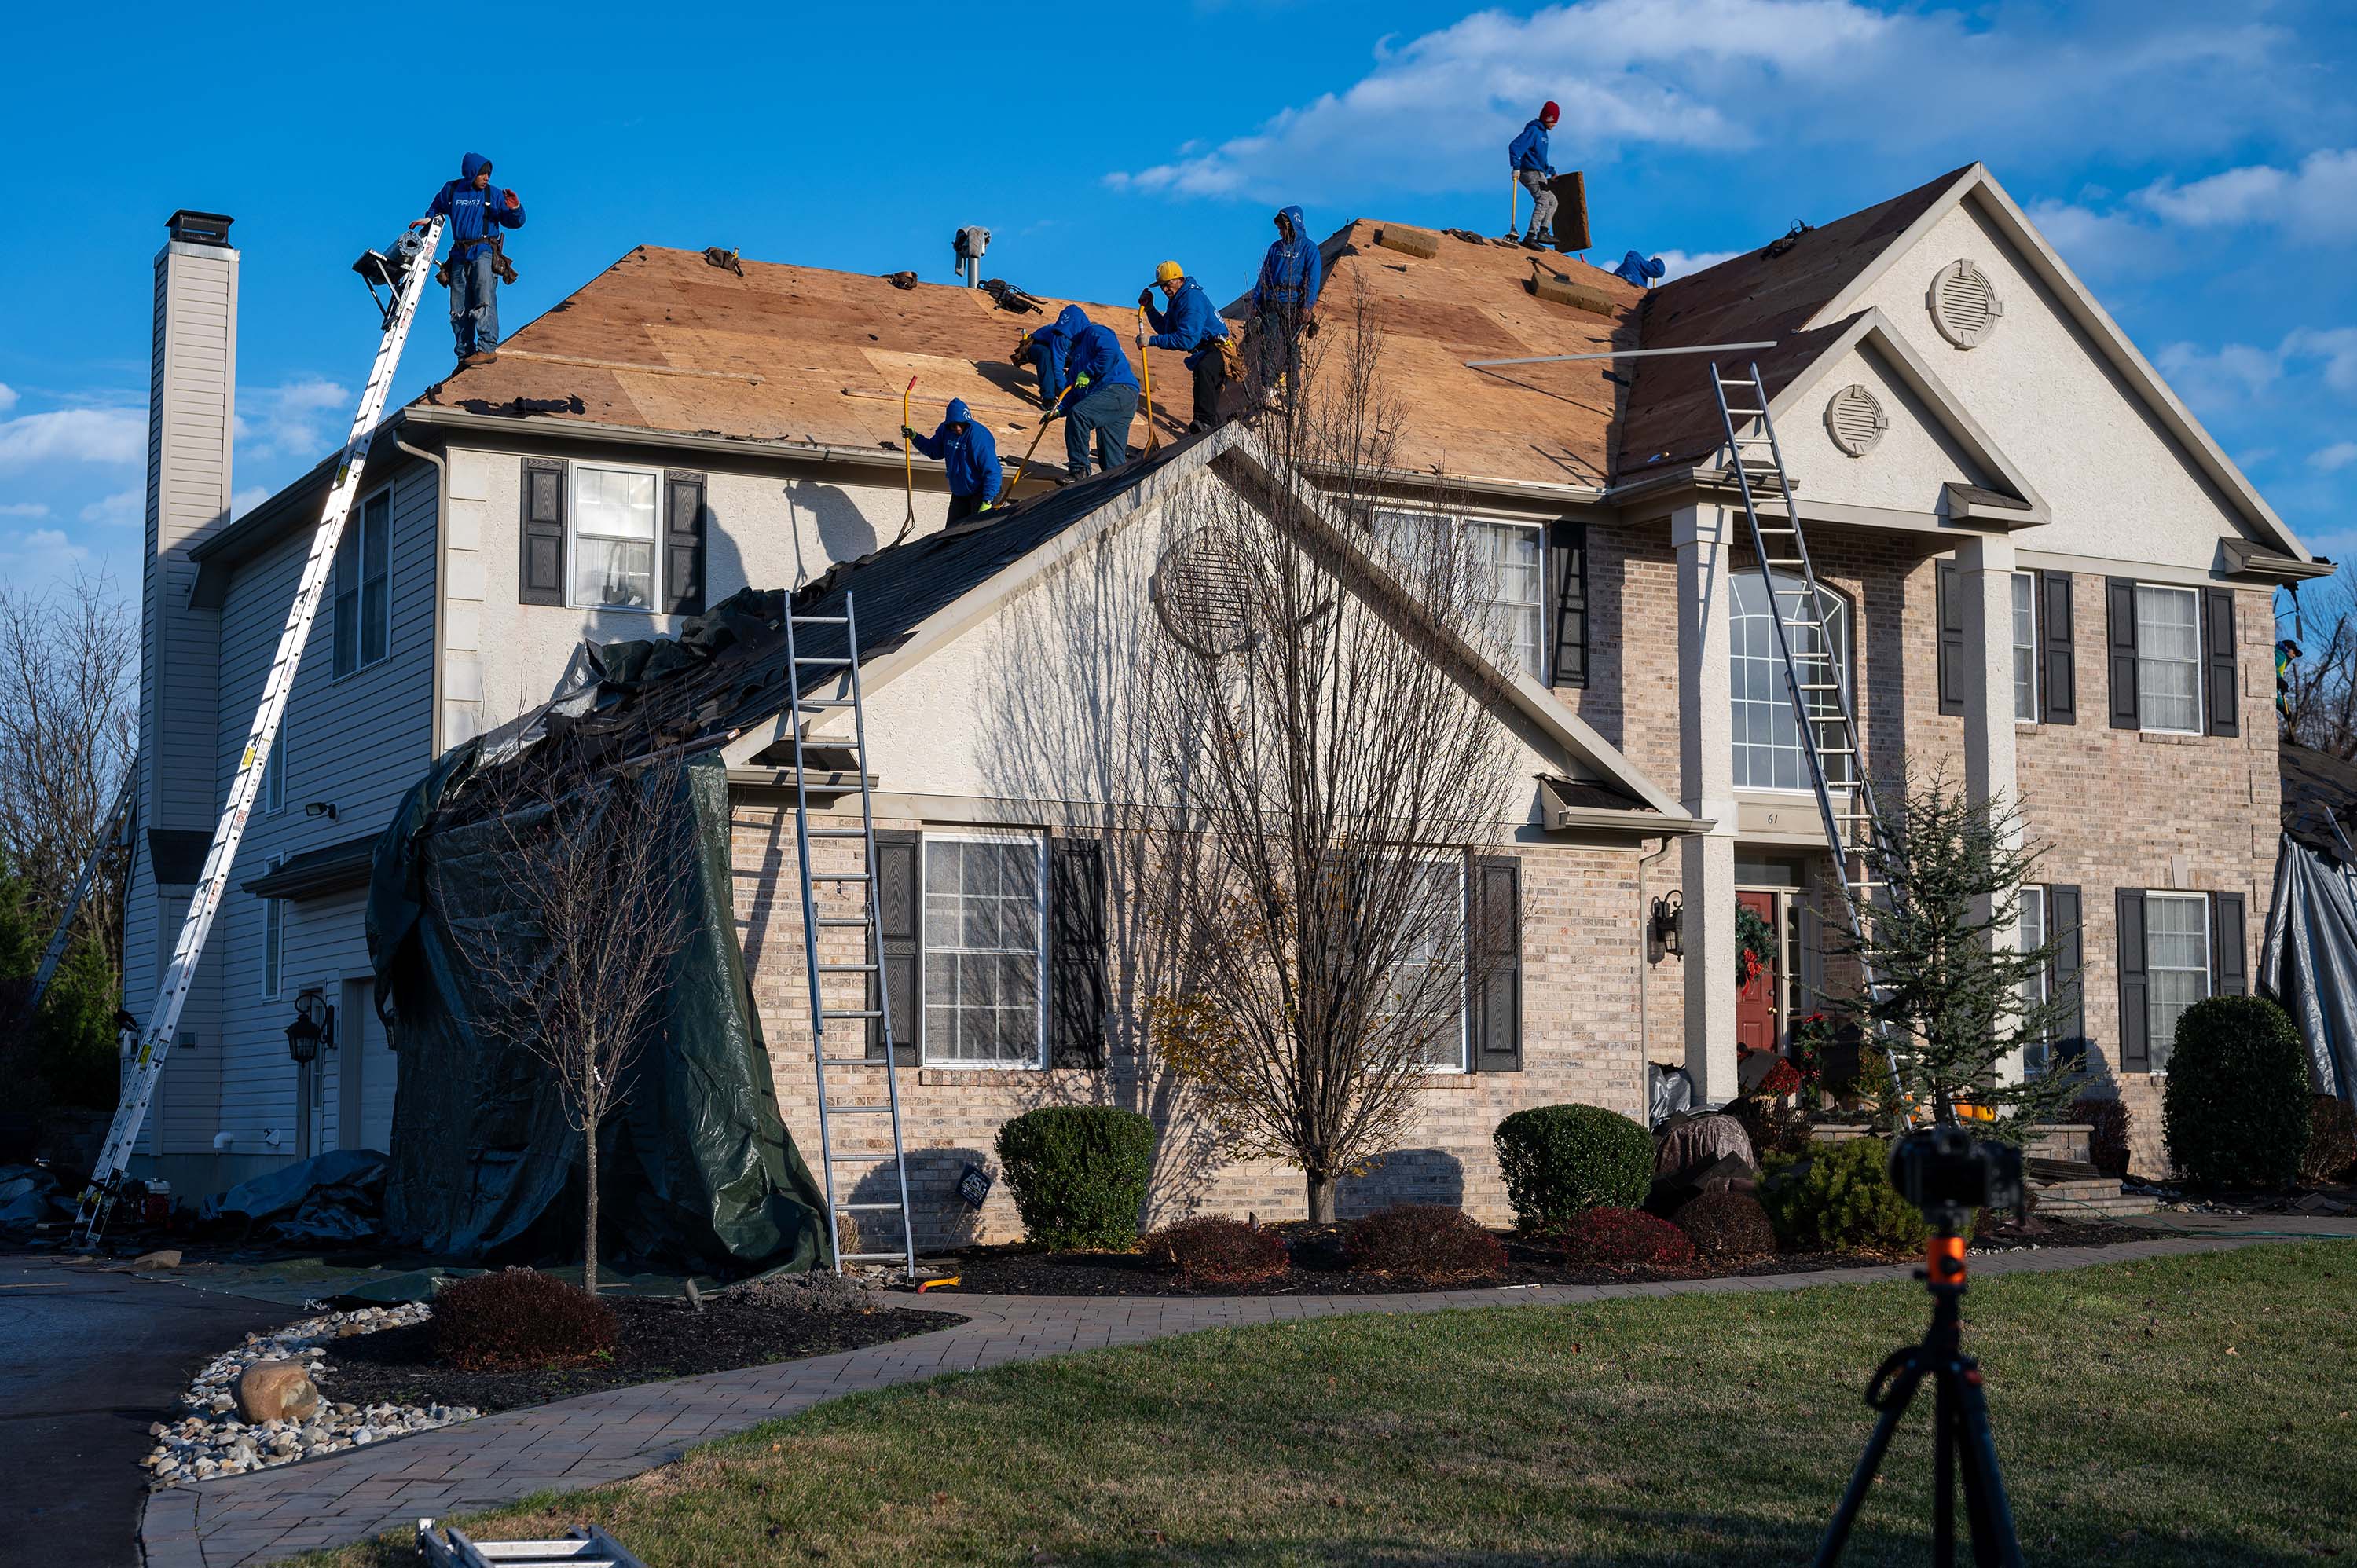 Glenside, PA Roofing repair company - residential roofing contractors in Glenside (large image)